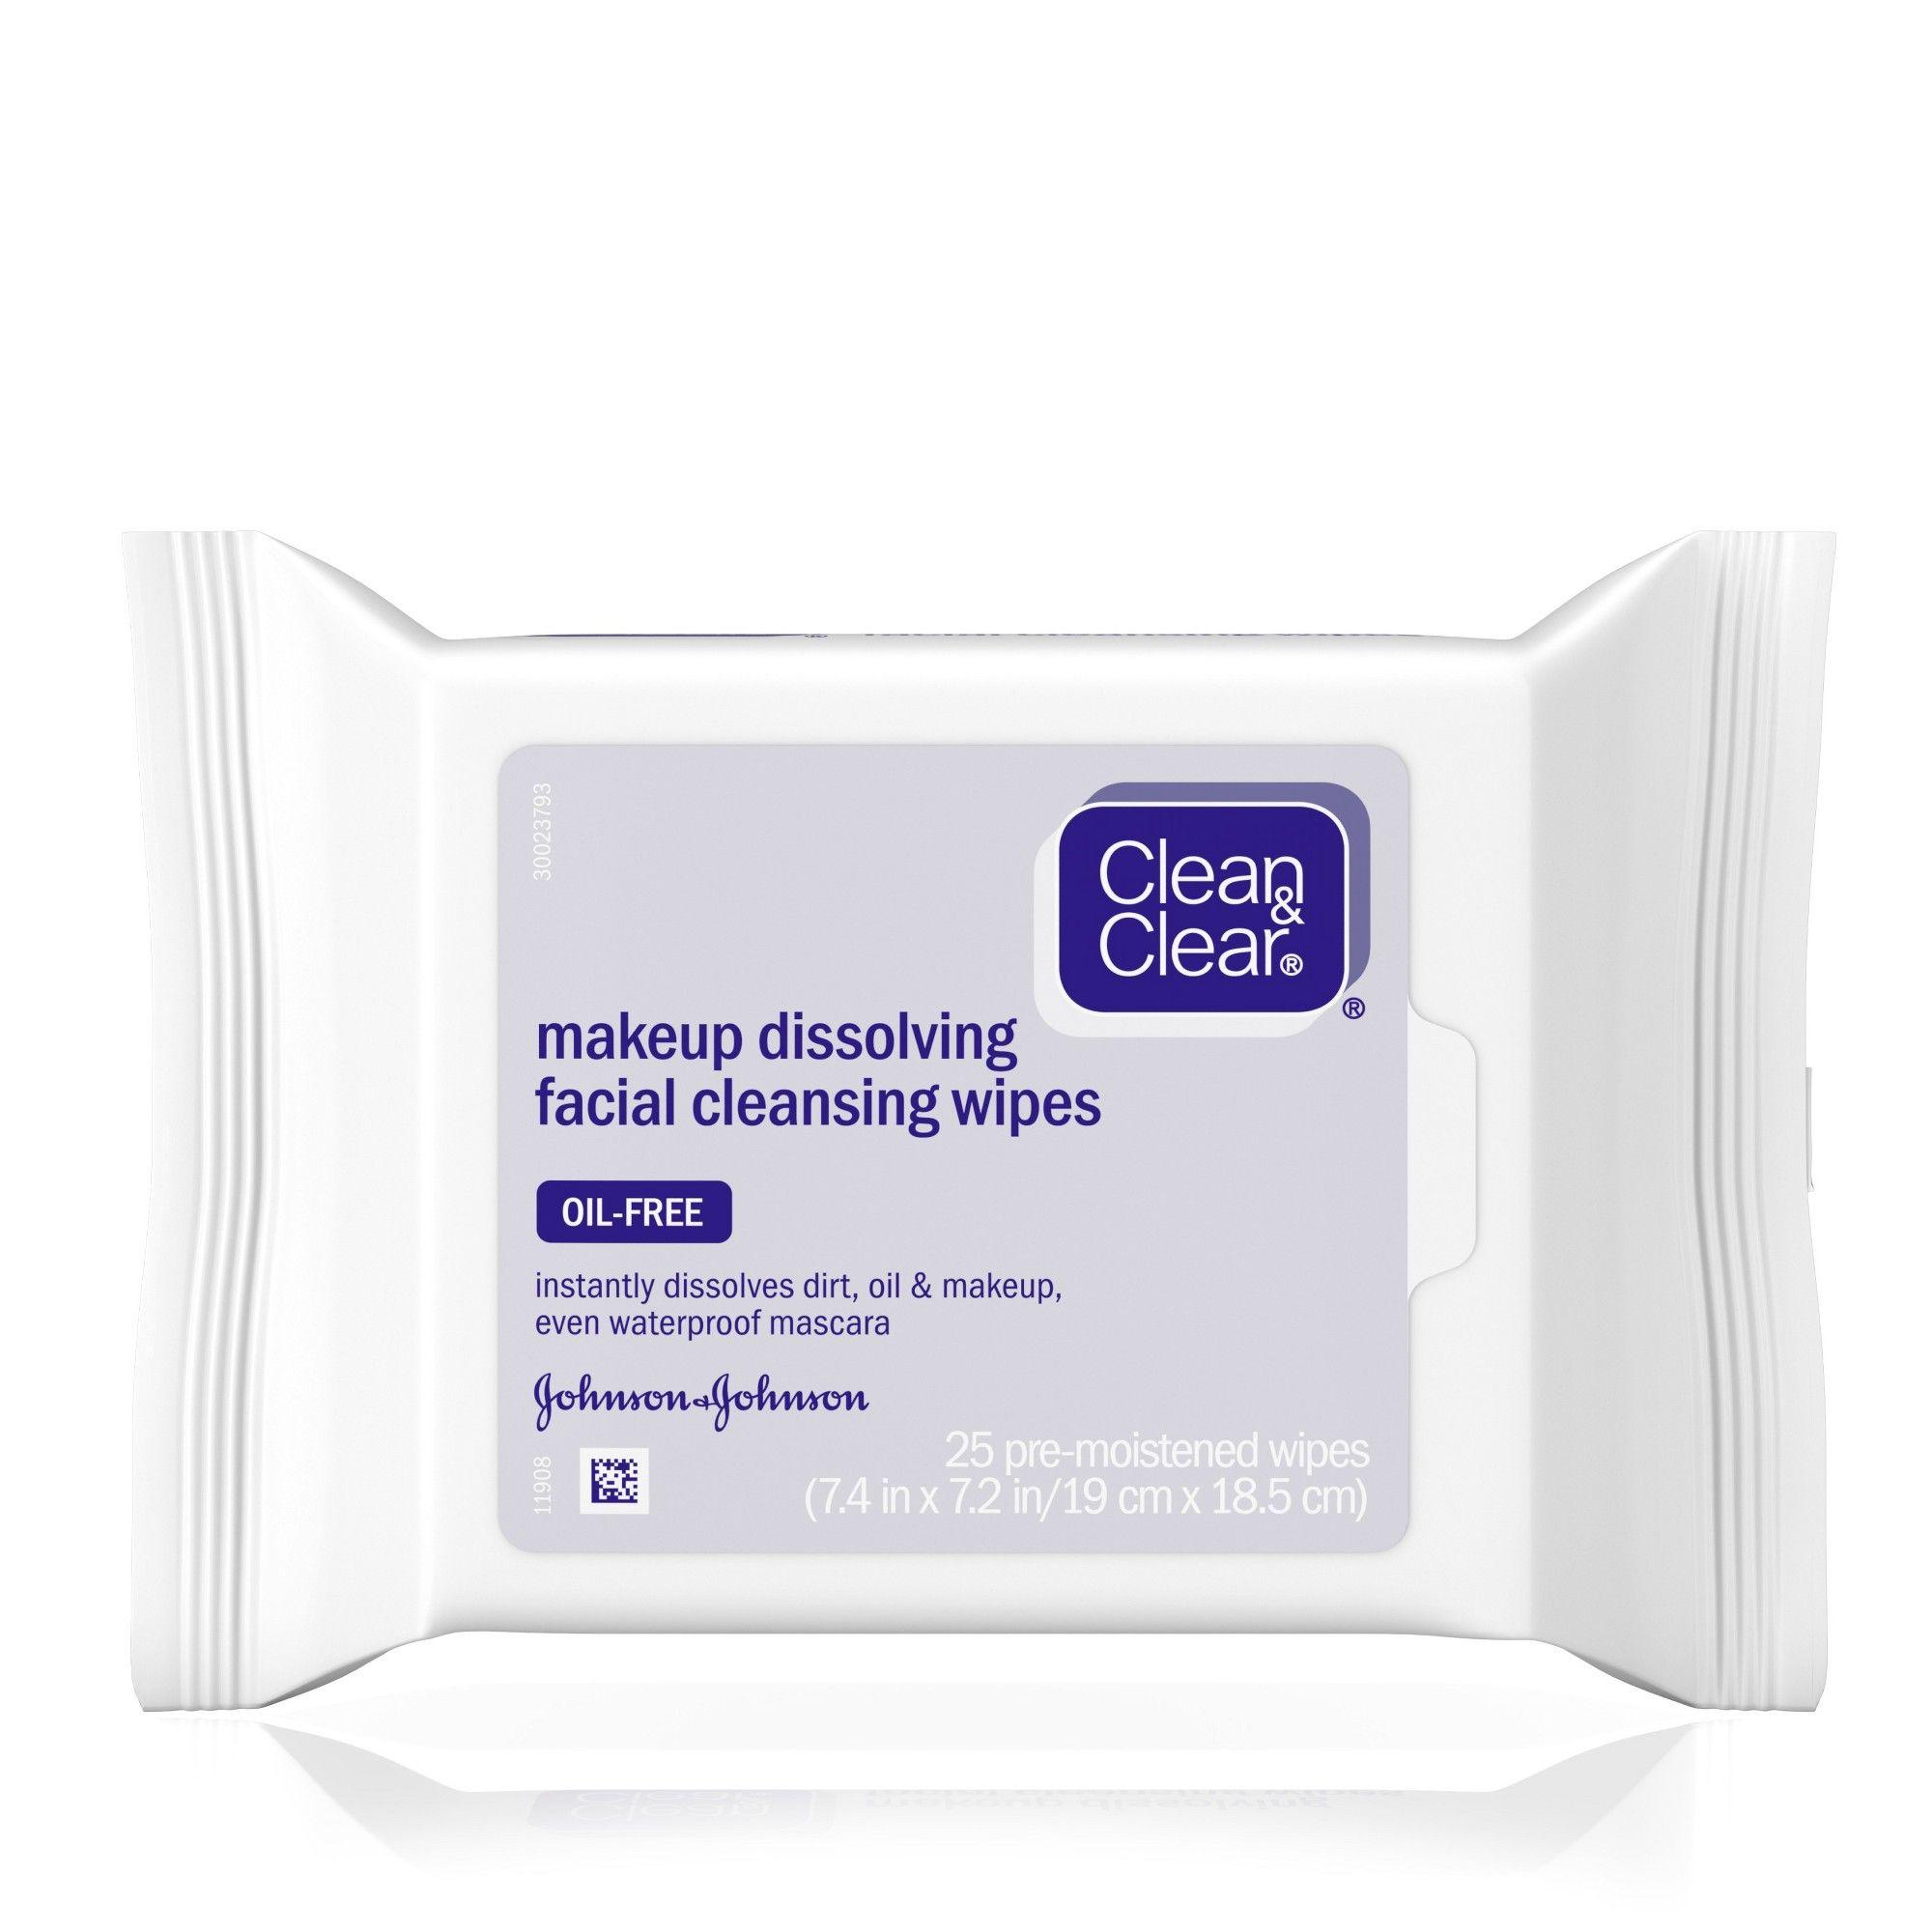 Makeup Dissolving Facial Cleansing Wipes, Oil-Free